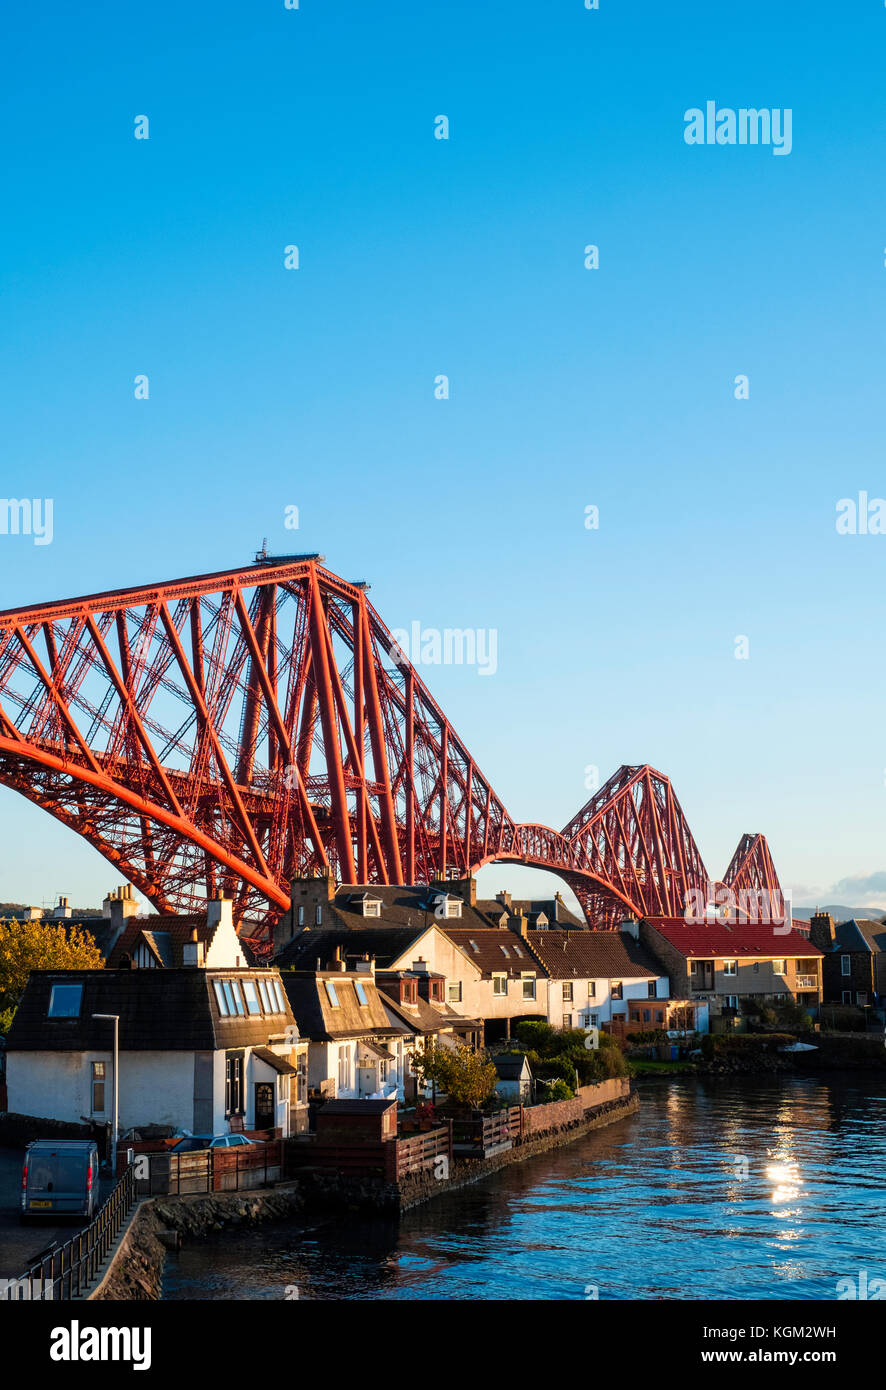 View of North Queensferry and the famous Forth Rail Bridge  spanning the Firth of Forth between Fife and West Lothian in Scotland,United Kingdom. Stock Photo